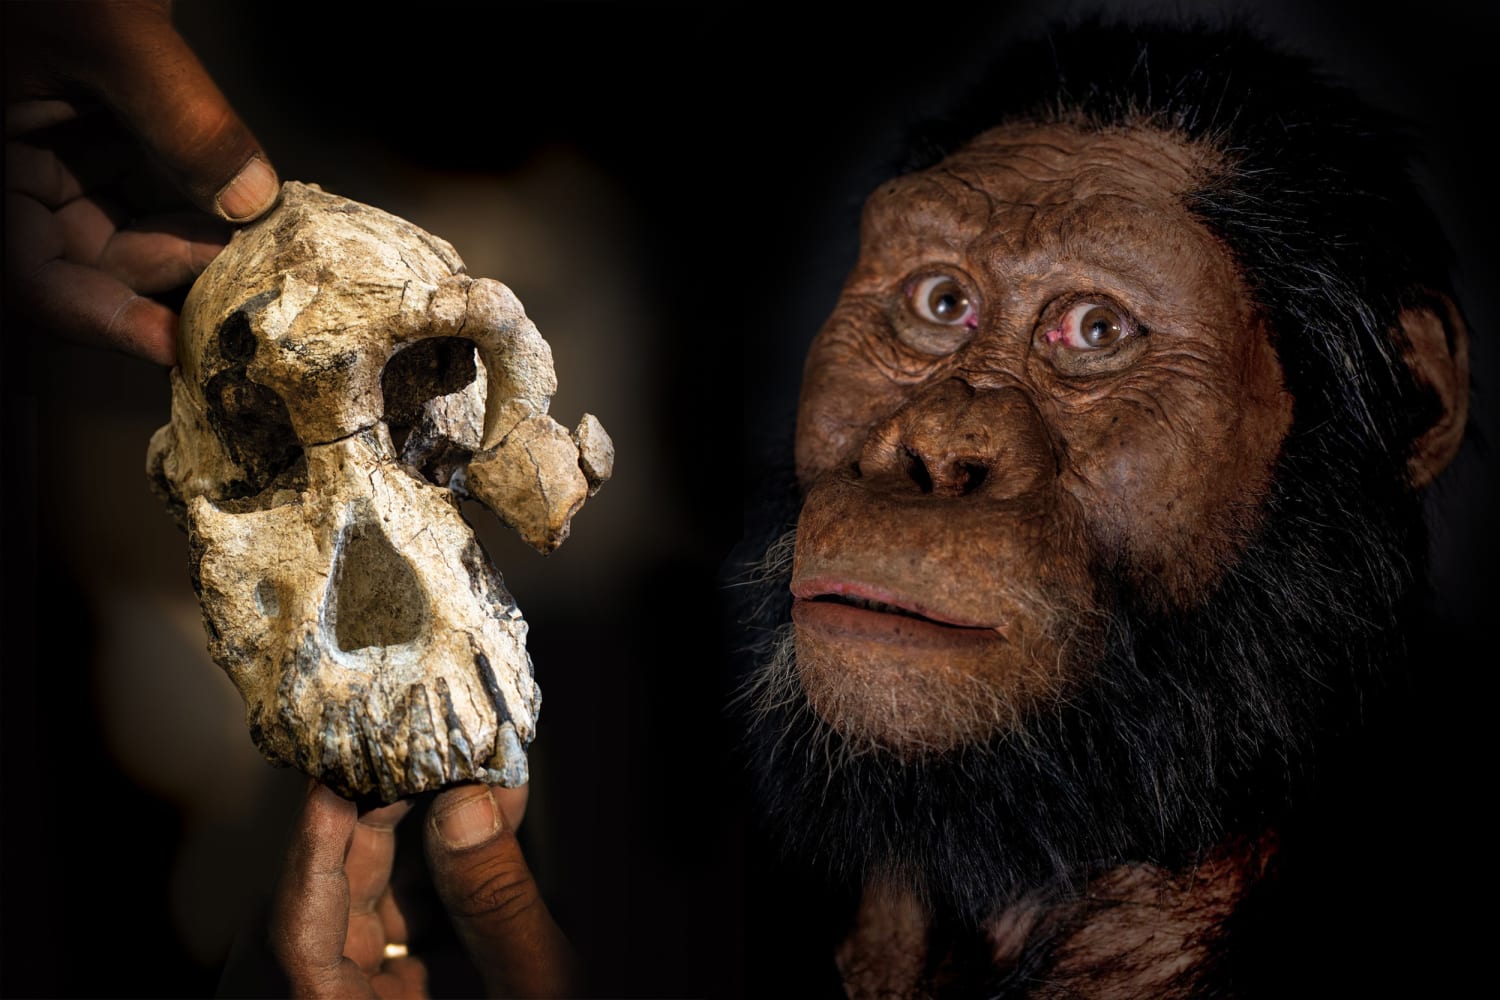 New fossil reveals face of 'Lucy' ancestor who lived almost 4